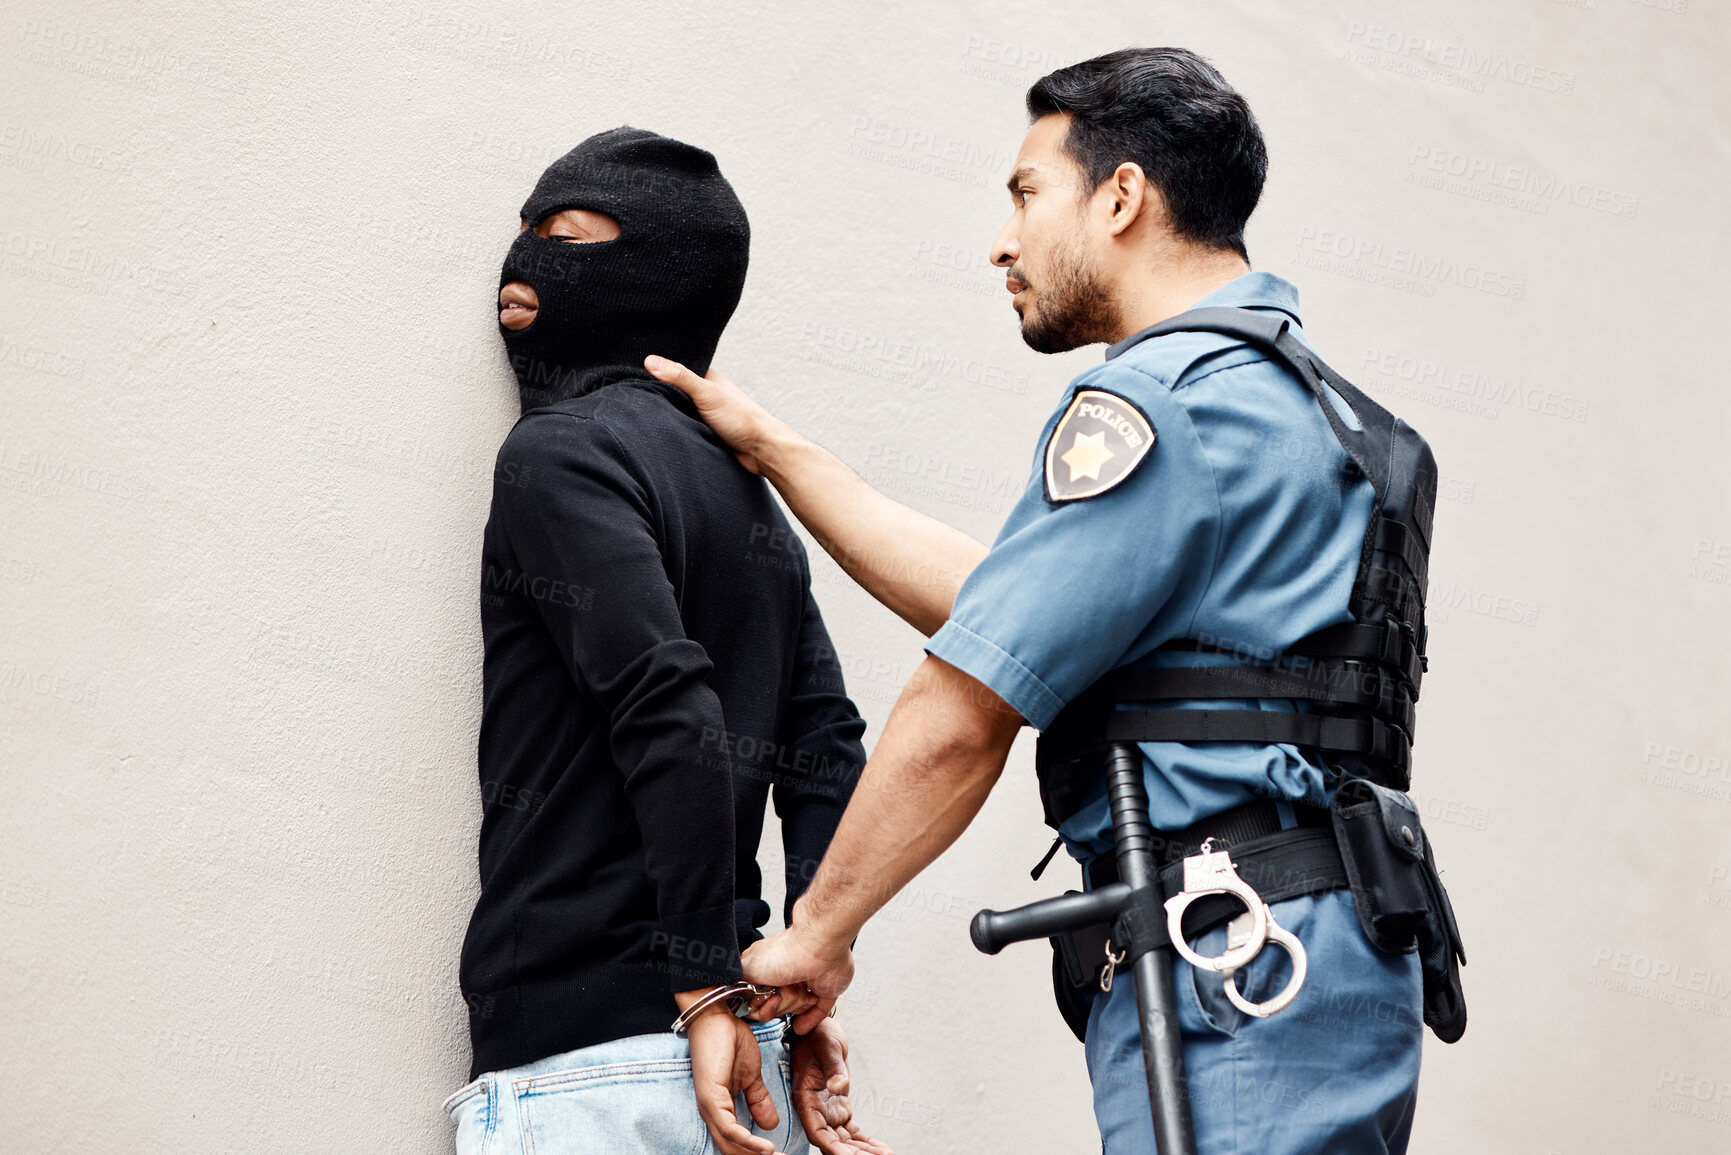 Buy stock photo Man, police and handcuffs on gangster for arrest, crime or justice in theft, robbery or violence. Male person, officer or security guard cuffing hands of robber, thief or criminal against the wall